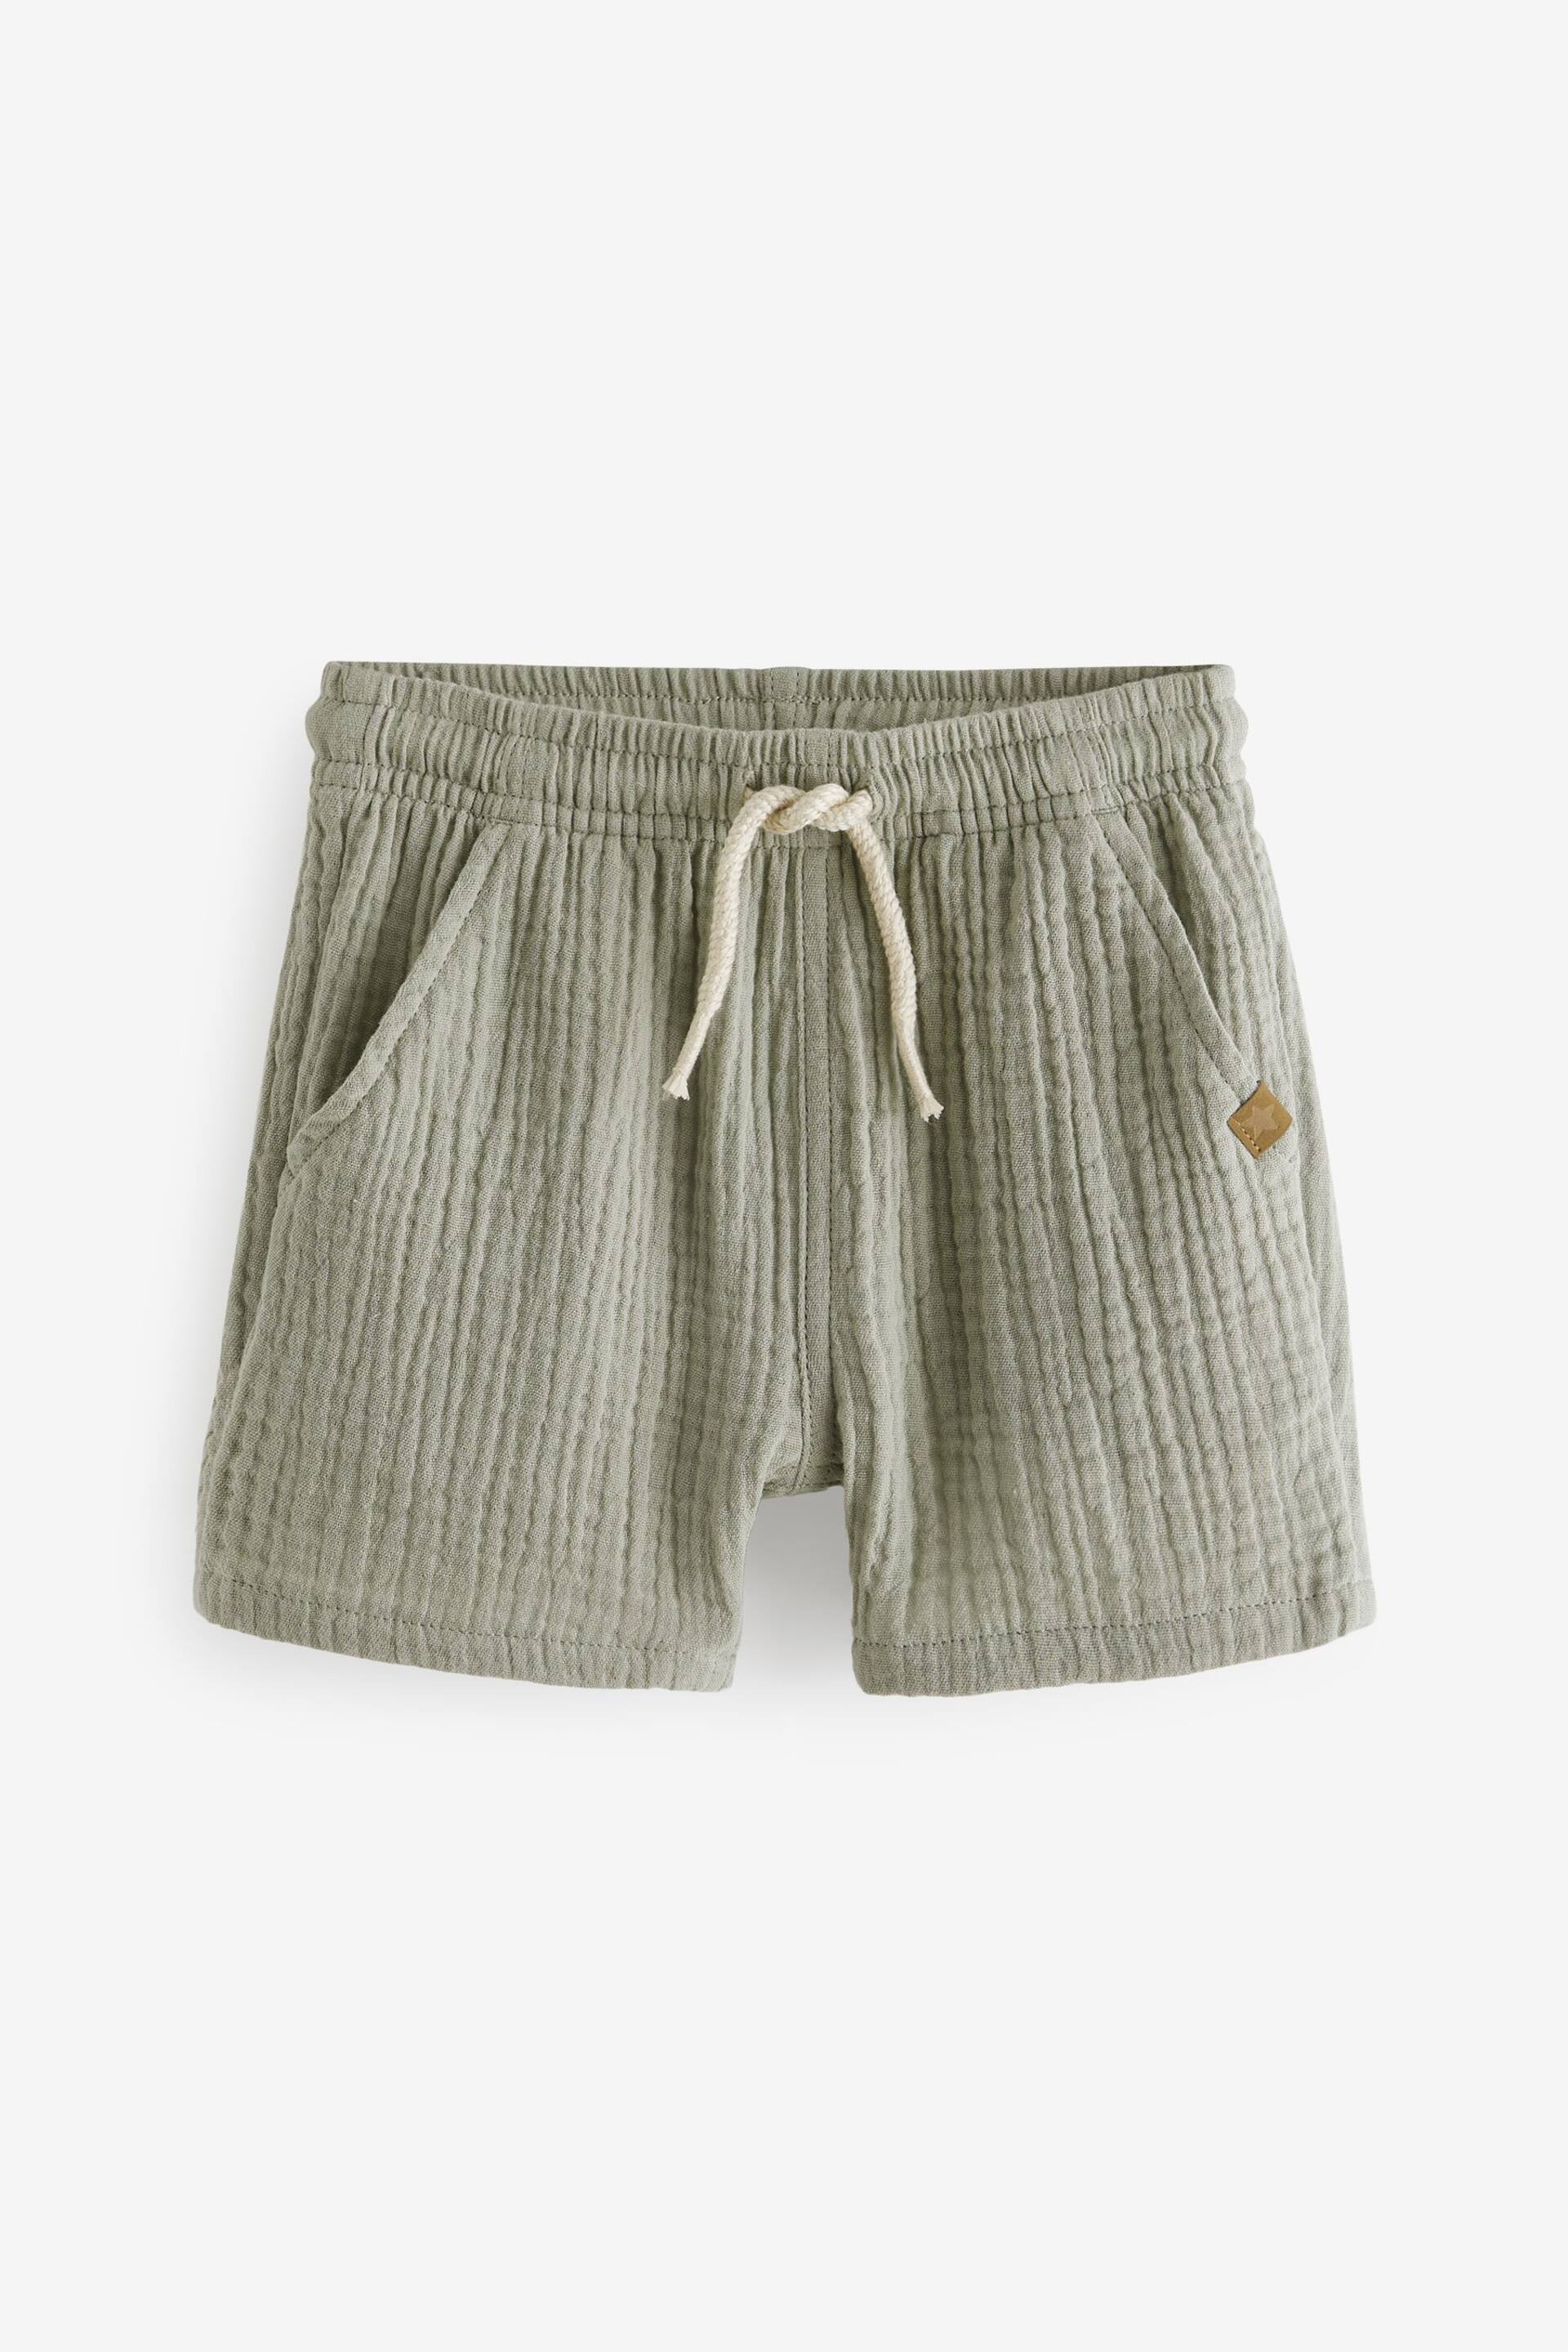 Sage Green Soft Textured Cotton Shorts (3mths-7yrs) - Image 5 of 7